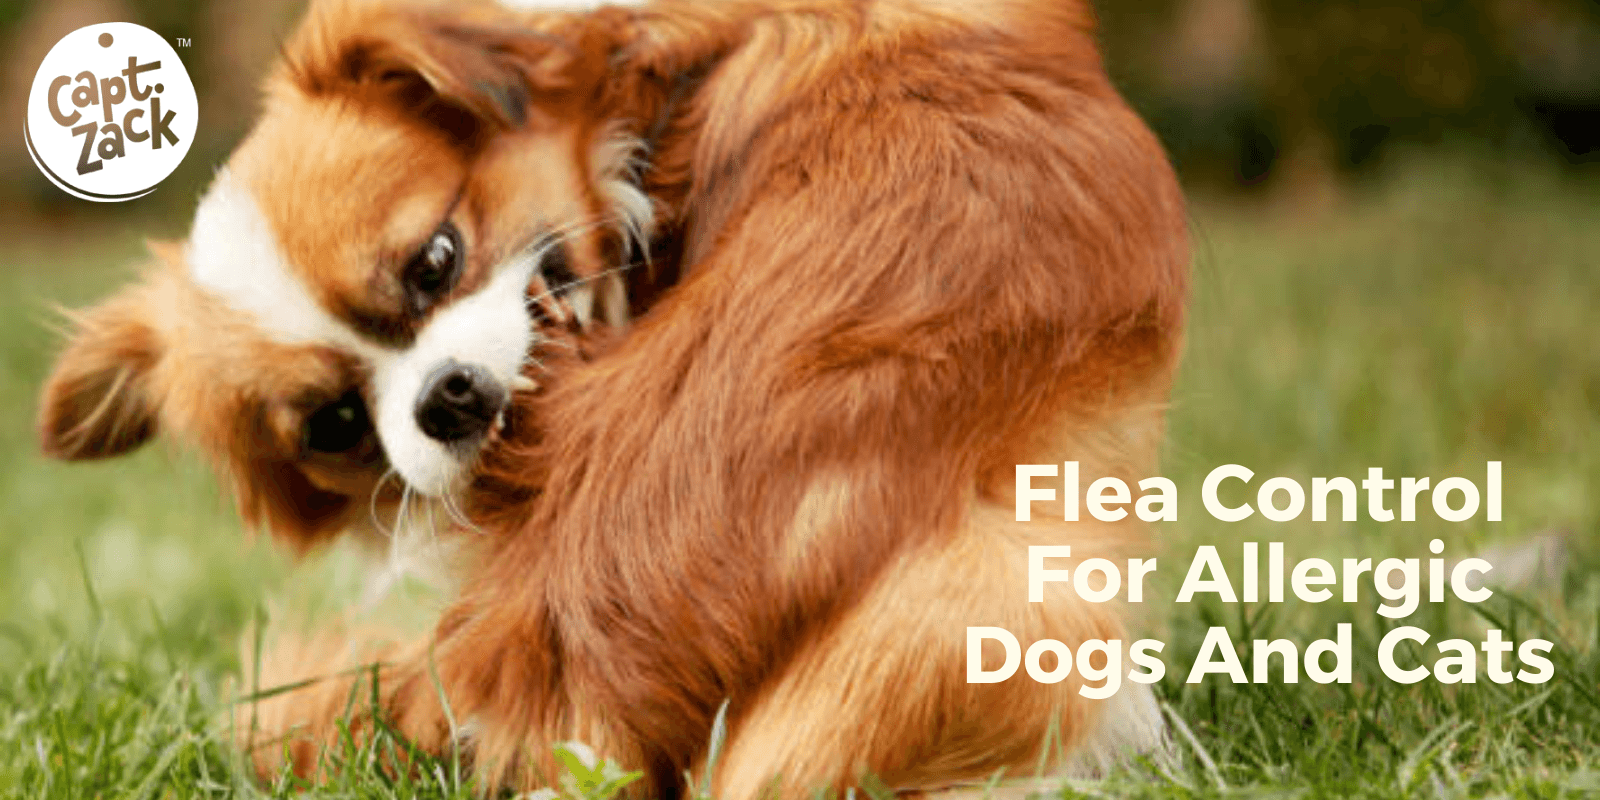 Flea Control For Allergic Dogs And Cats